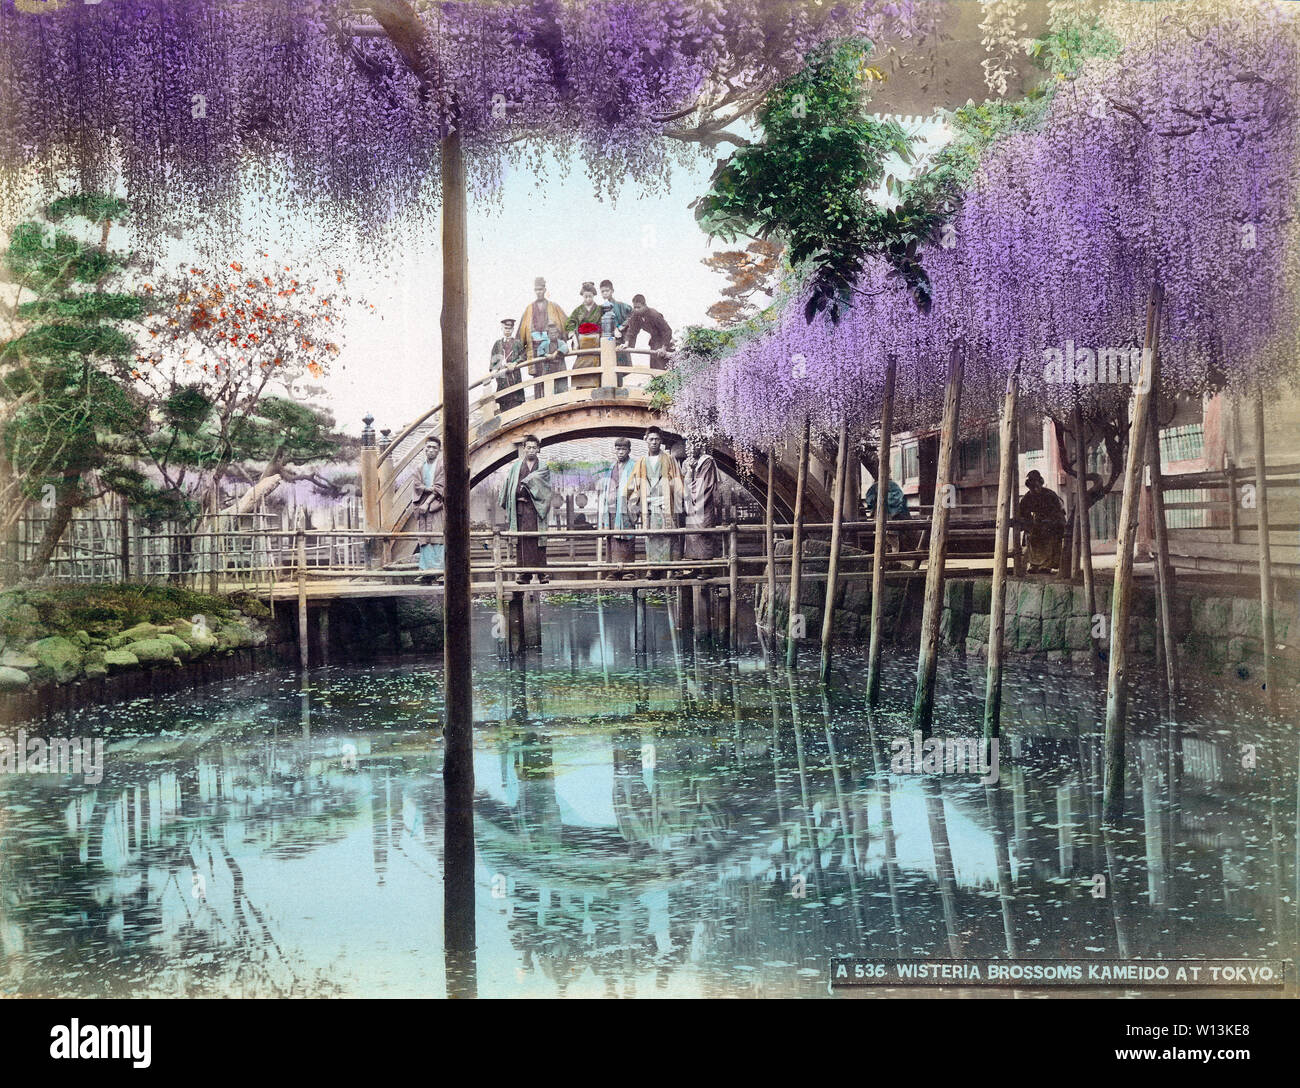 [ 1890s Japan - Wisteria at Kameido Tenjin Shrine, Tokyo ] —   Shinji Pond, wisteria blossom and a traditional arched bridge at Kameido Tenjin shrine in Tokyo. The Kameido shrine is dedicated to Sugawara Michizane, a political figure and scholar of Chinese literature of the Heian Period (794 – 1185) who is revered as a deity of learning.  The shrine, arched bridge and wisteria trellis were destroyed by US bombing during WWII. They were rebuilt, but the bridge is now made of concrete and lacks girders. The scene has lost much, if not all, of its old charm.  19th century vintage albumen photogra Stock Photo